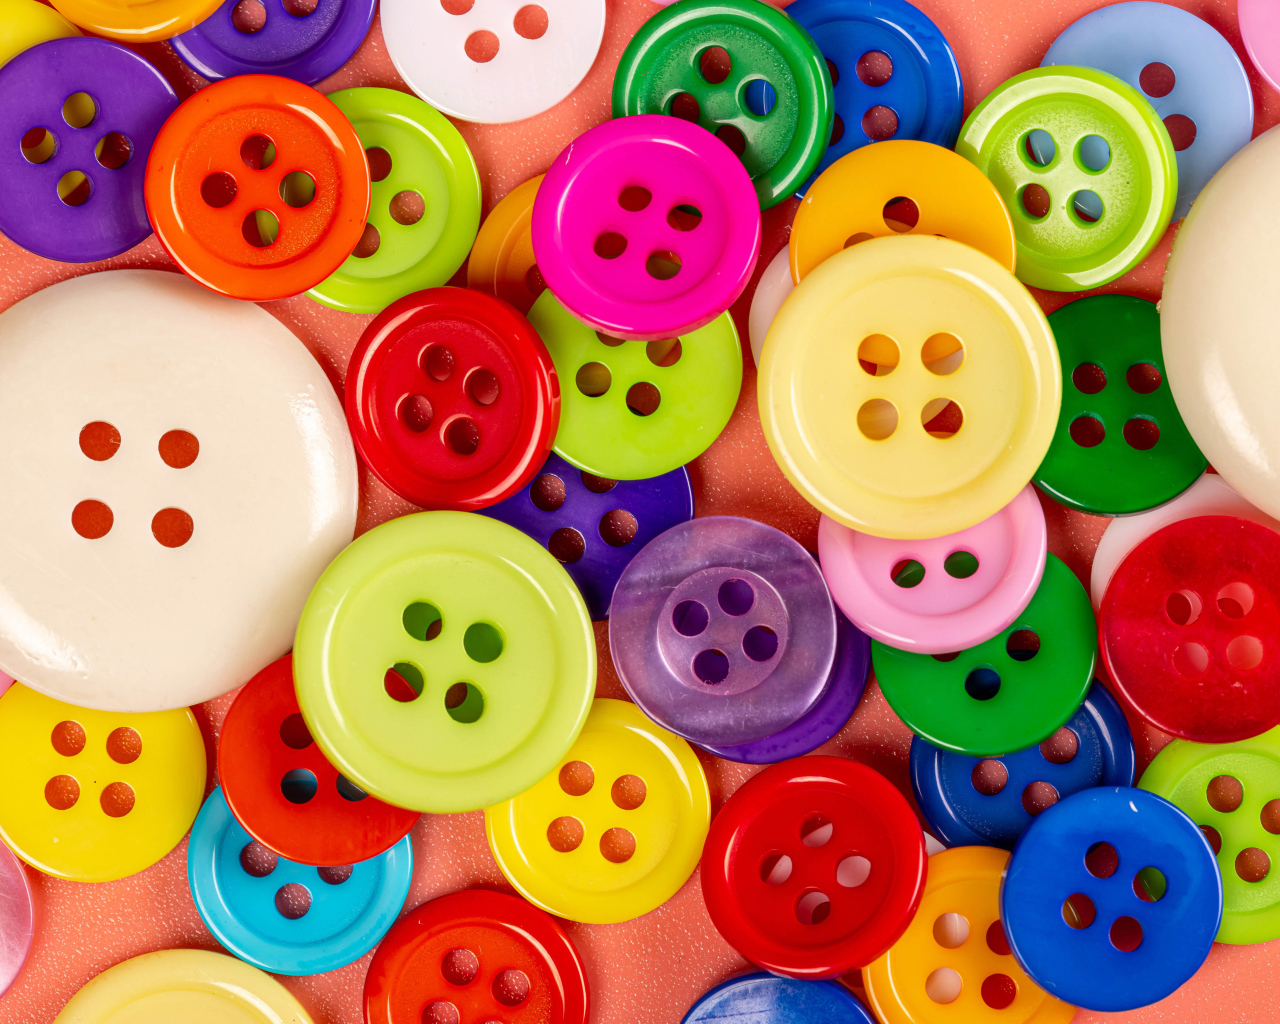 Many multi-colored buttons of different sizes